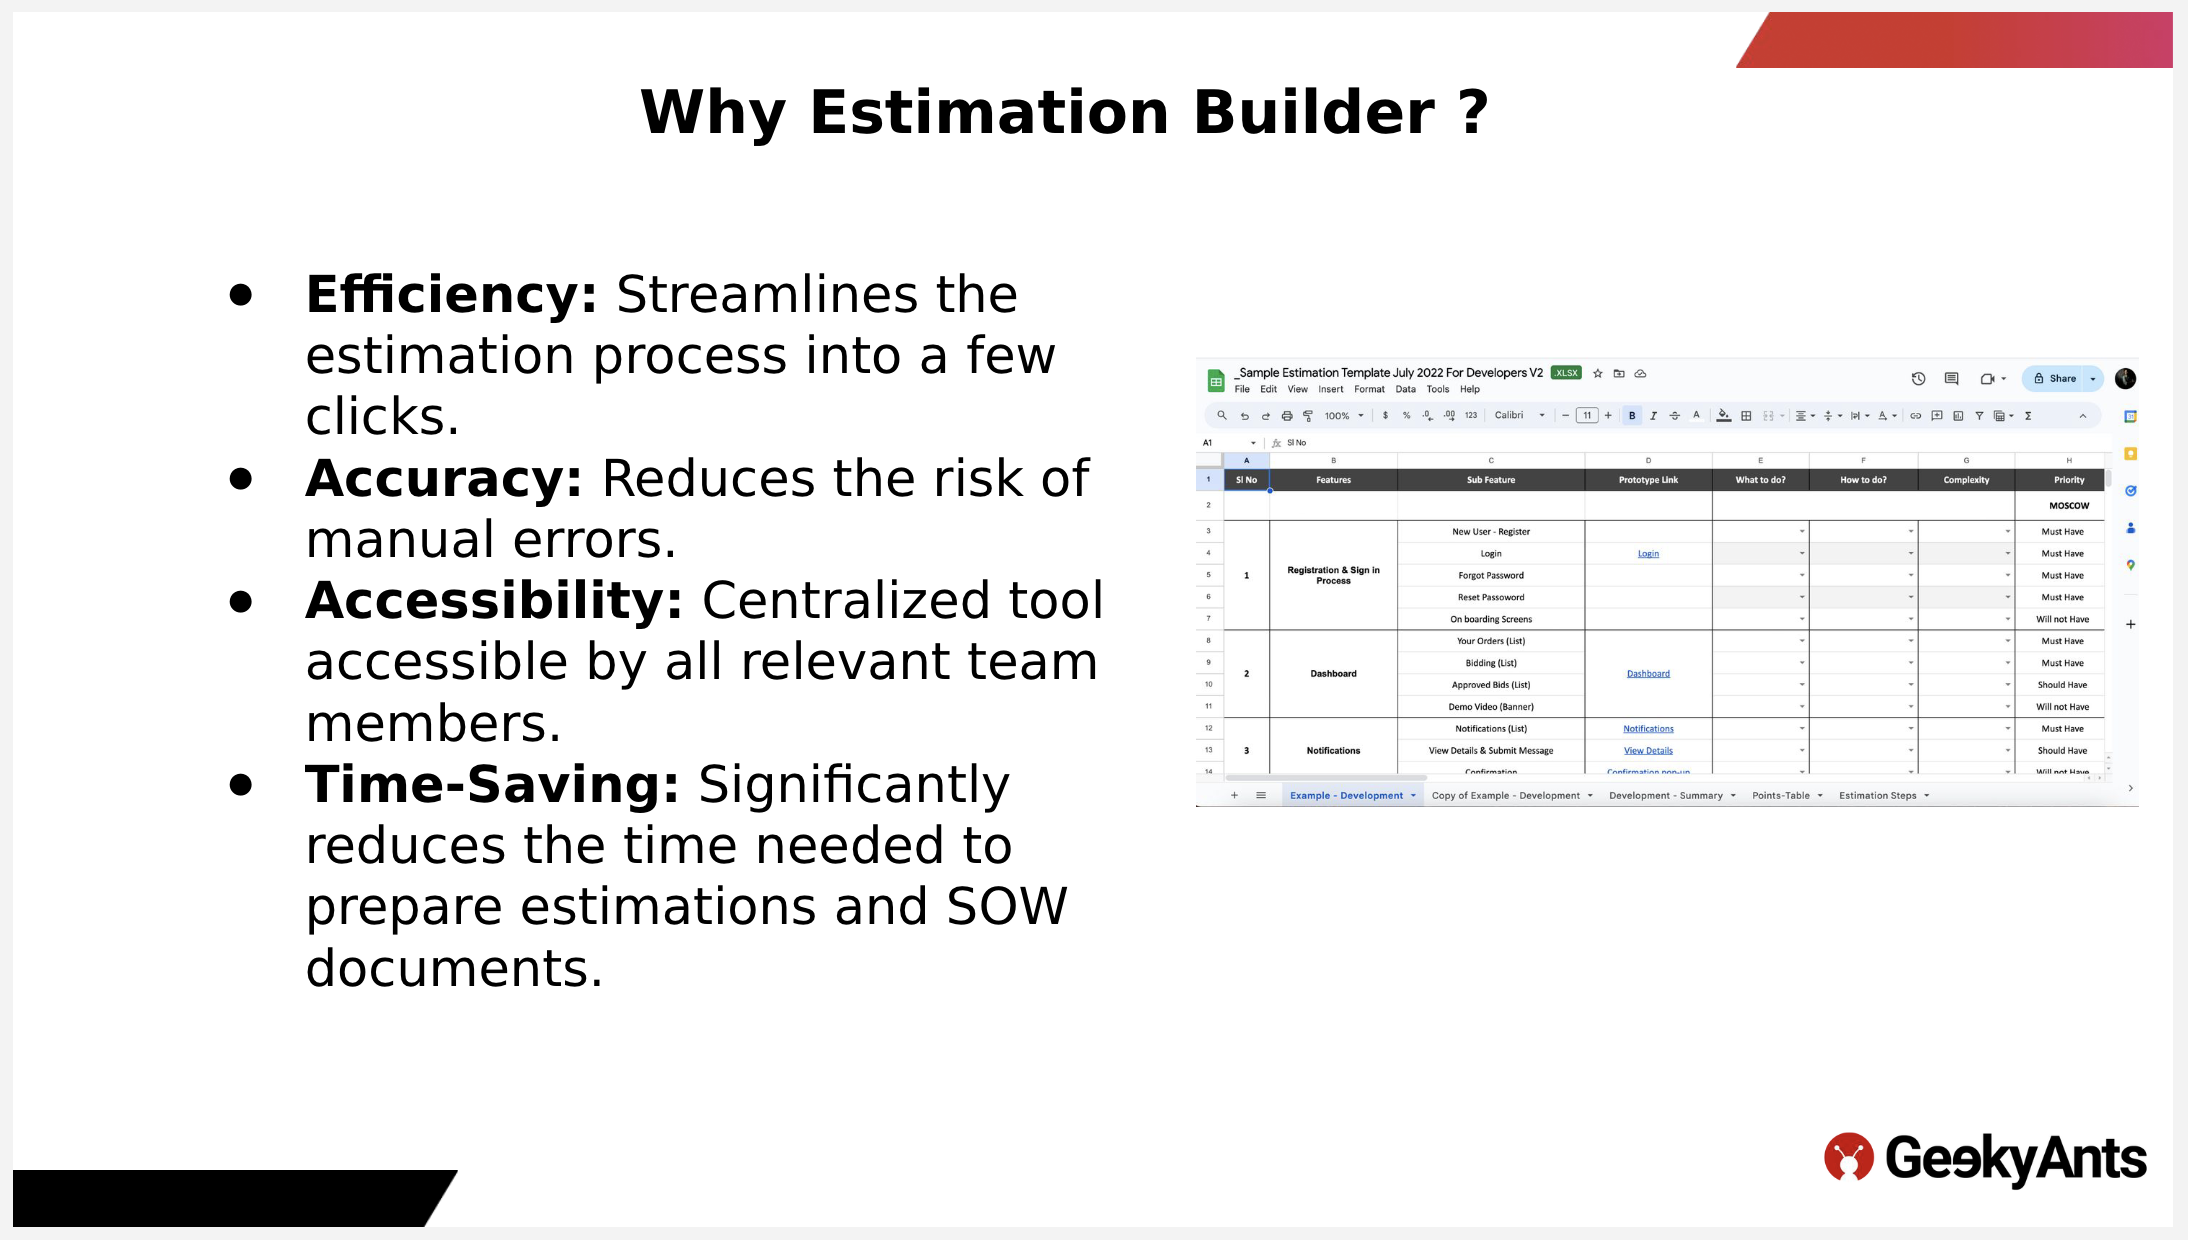 Why project estimation builder?